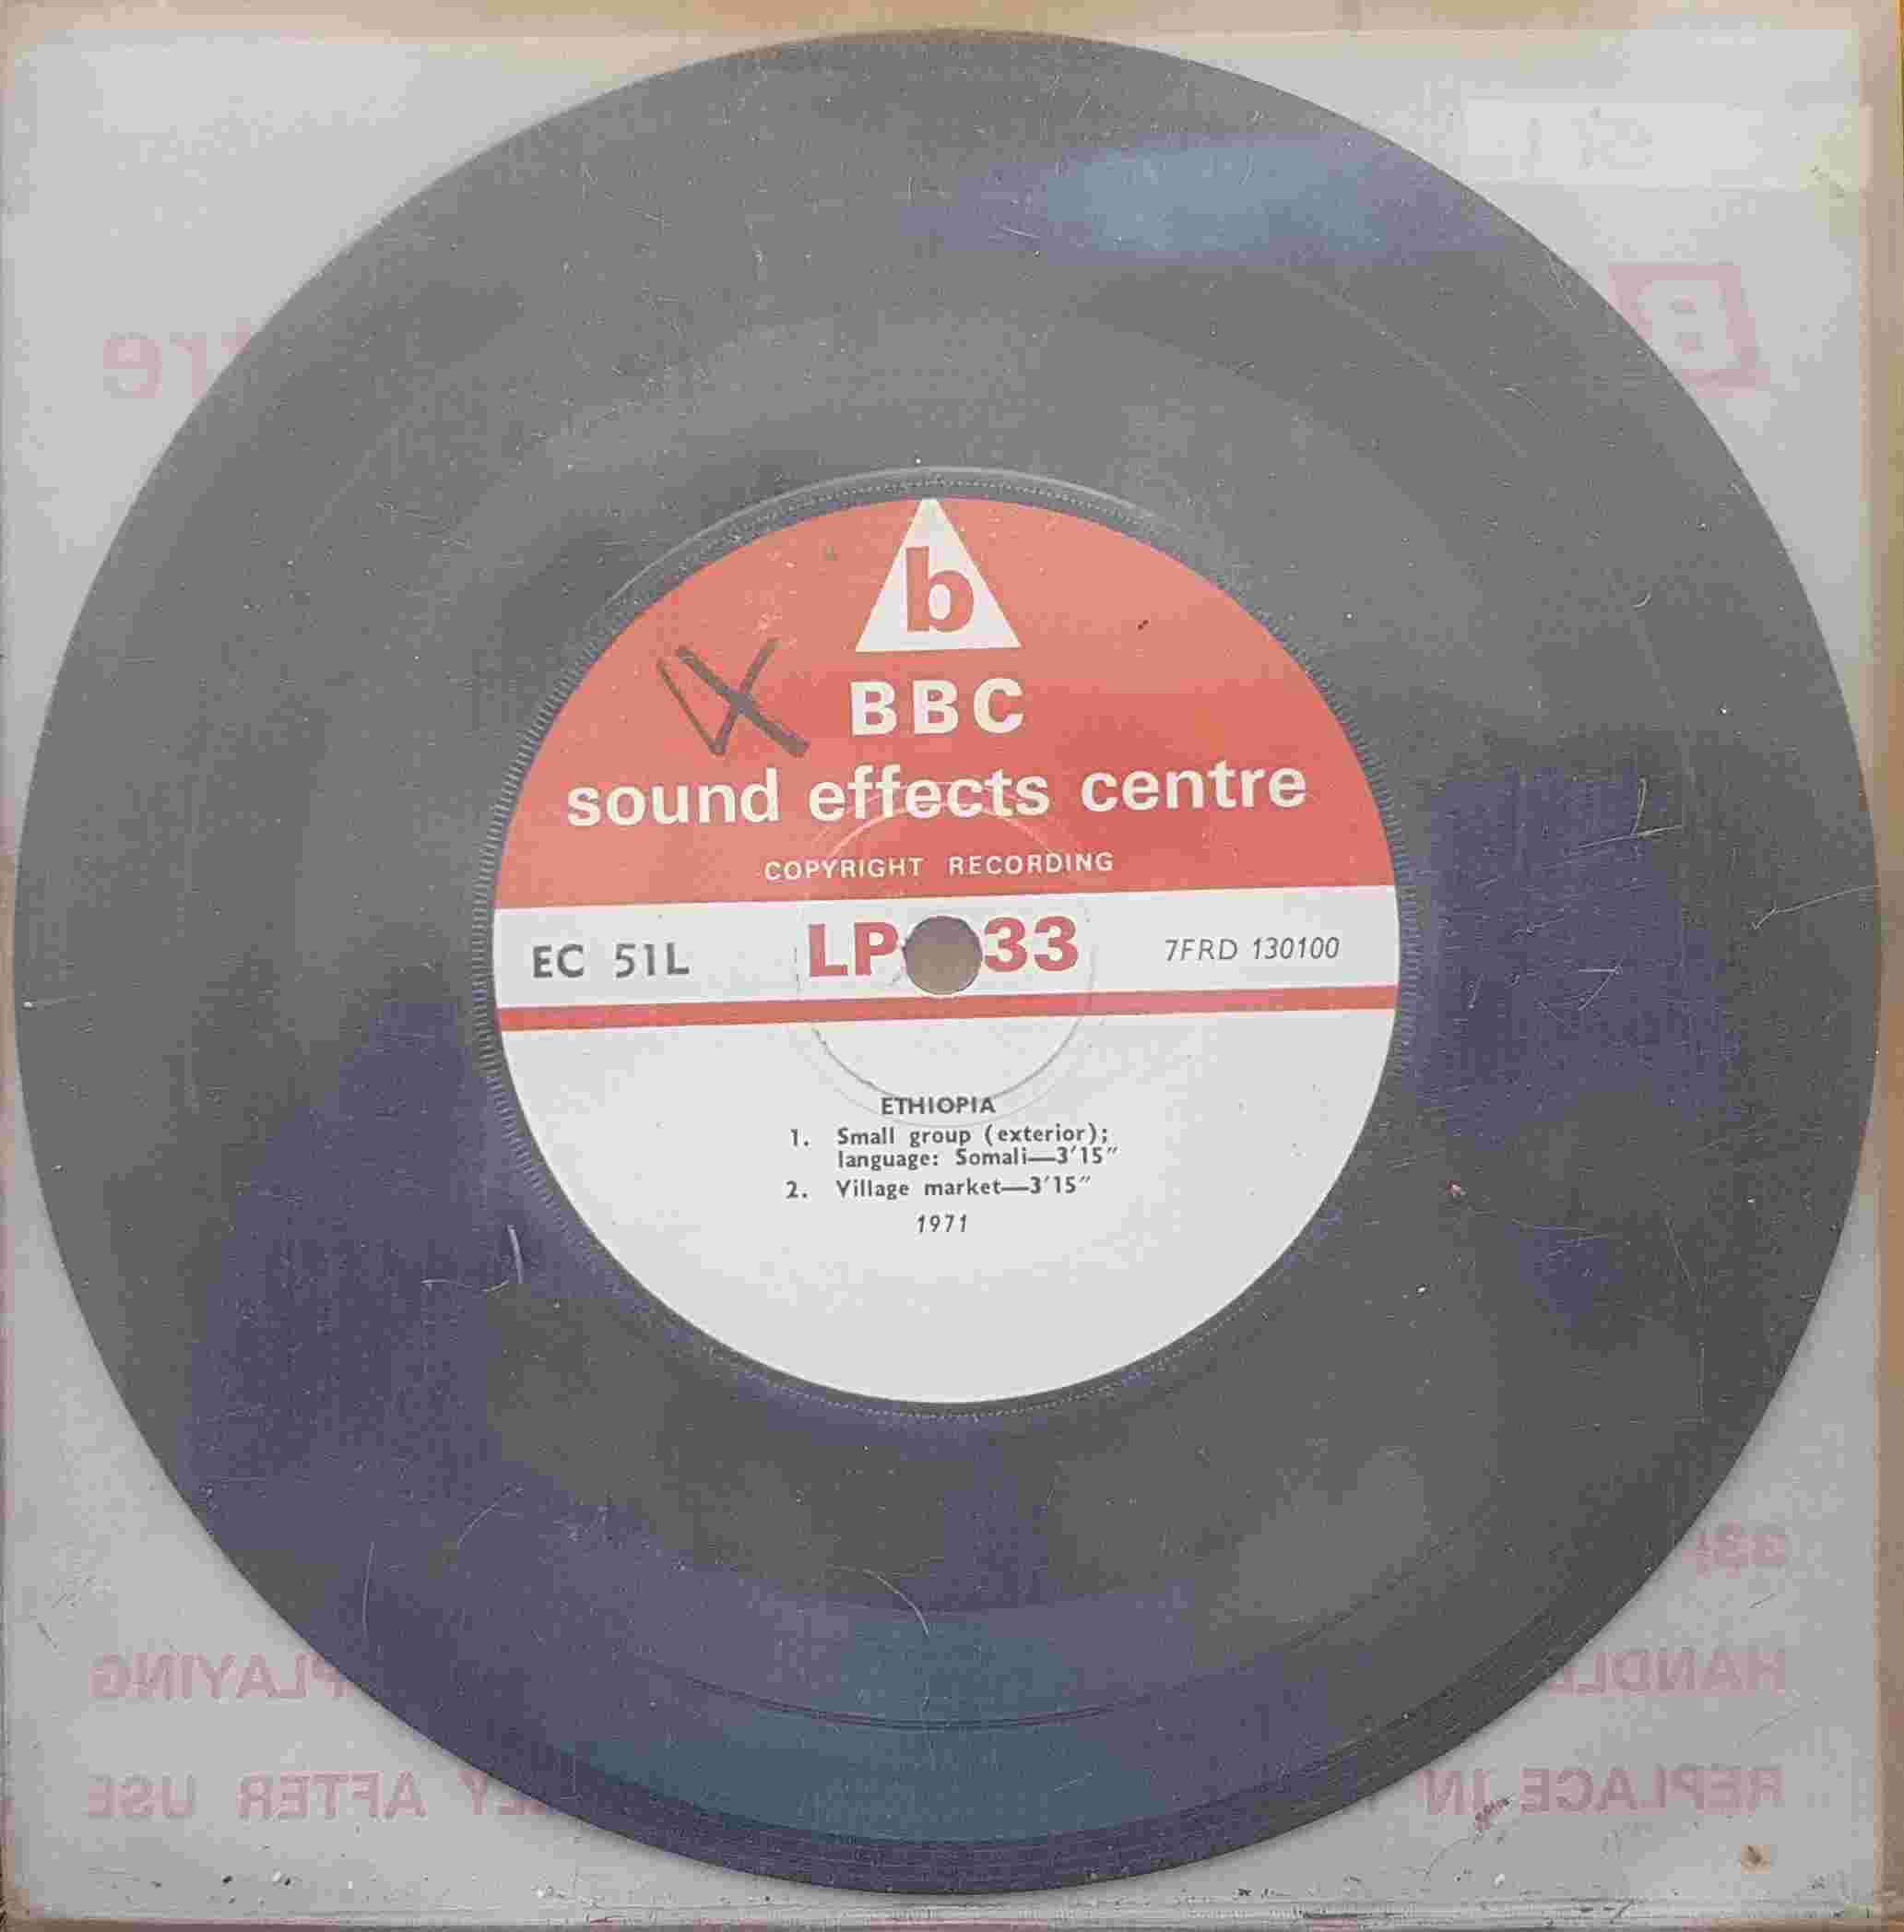 Picture of EC 51L Ethiopia by artist Not registered from the BBC records and Tapes library